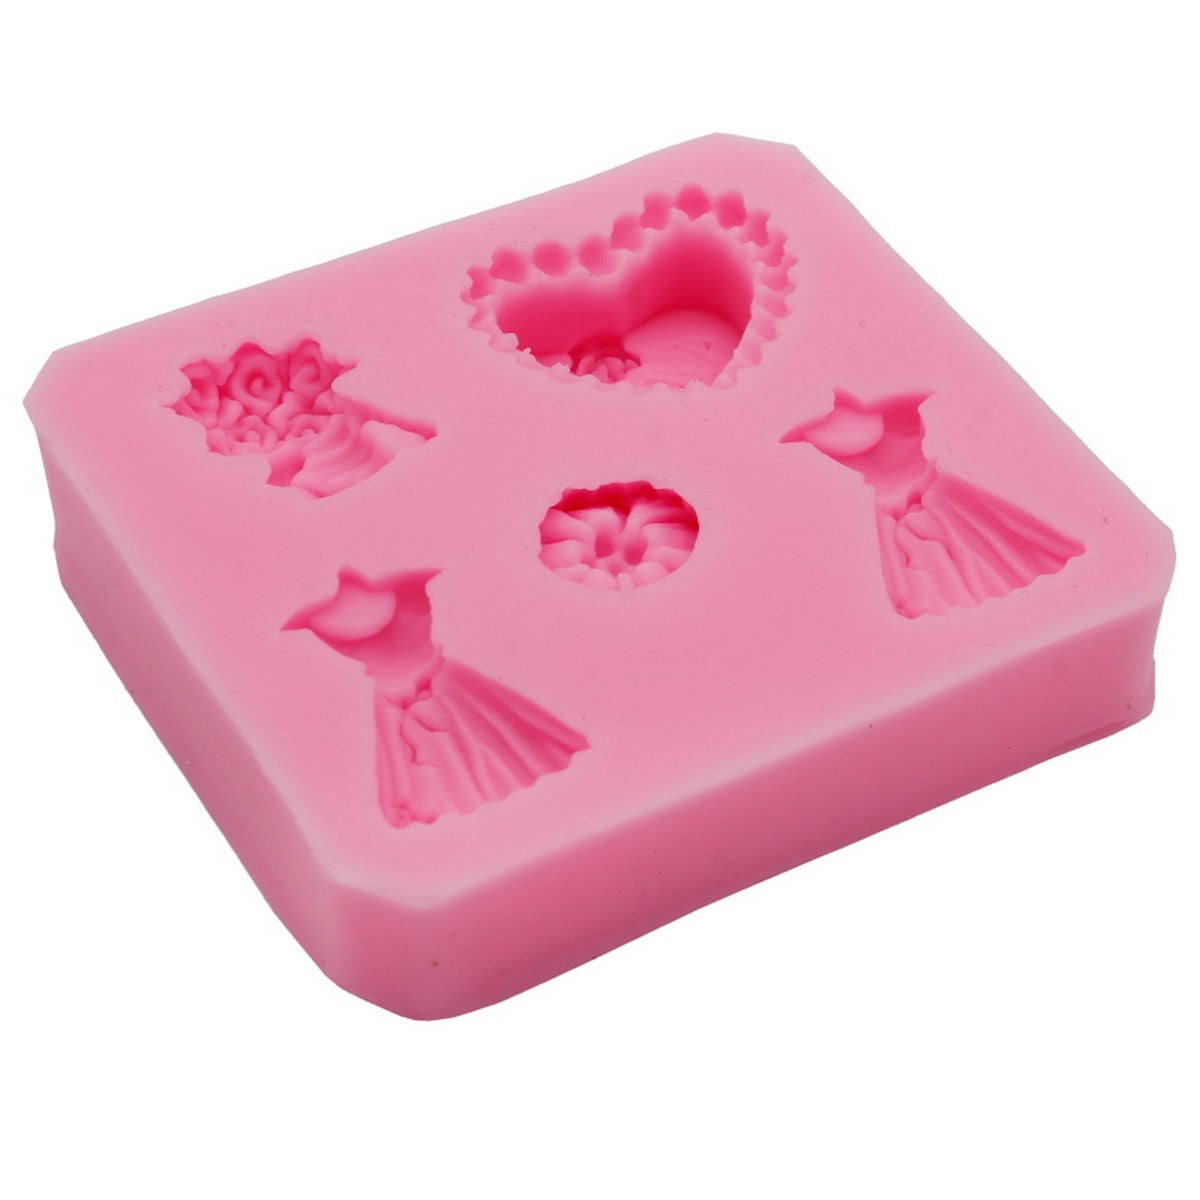 jags-mumbai Mould Silicone Mould Baby Born Shaped 3D Cake JSF128